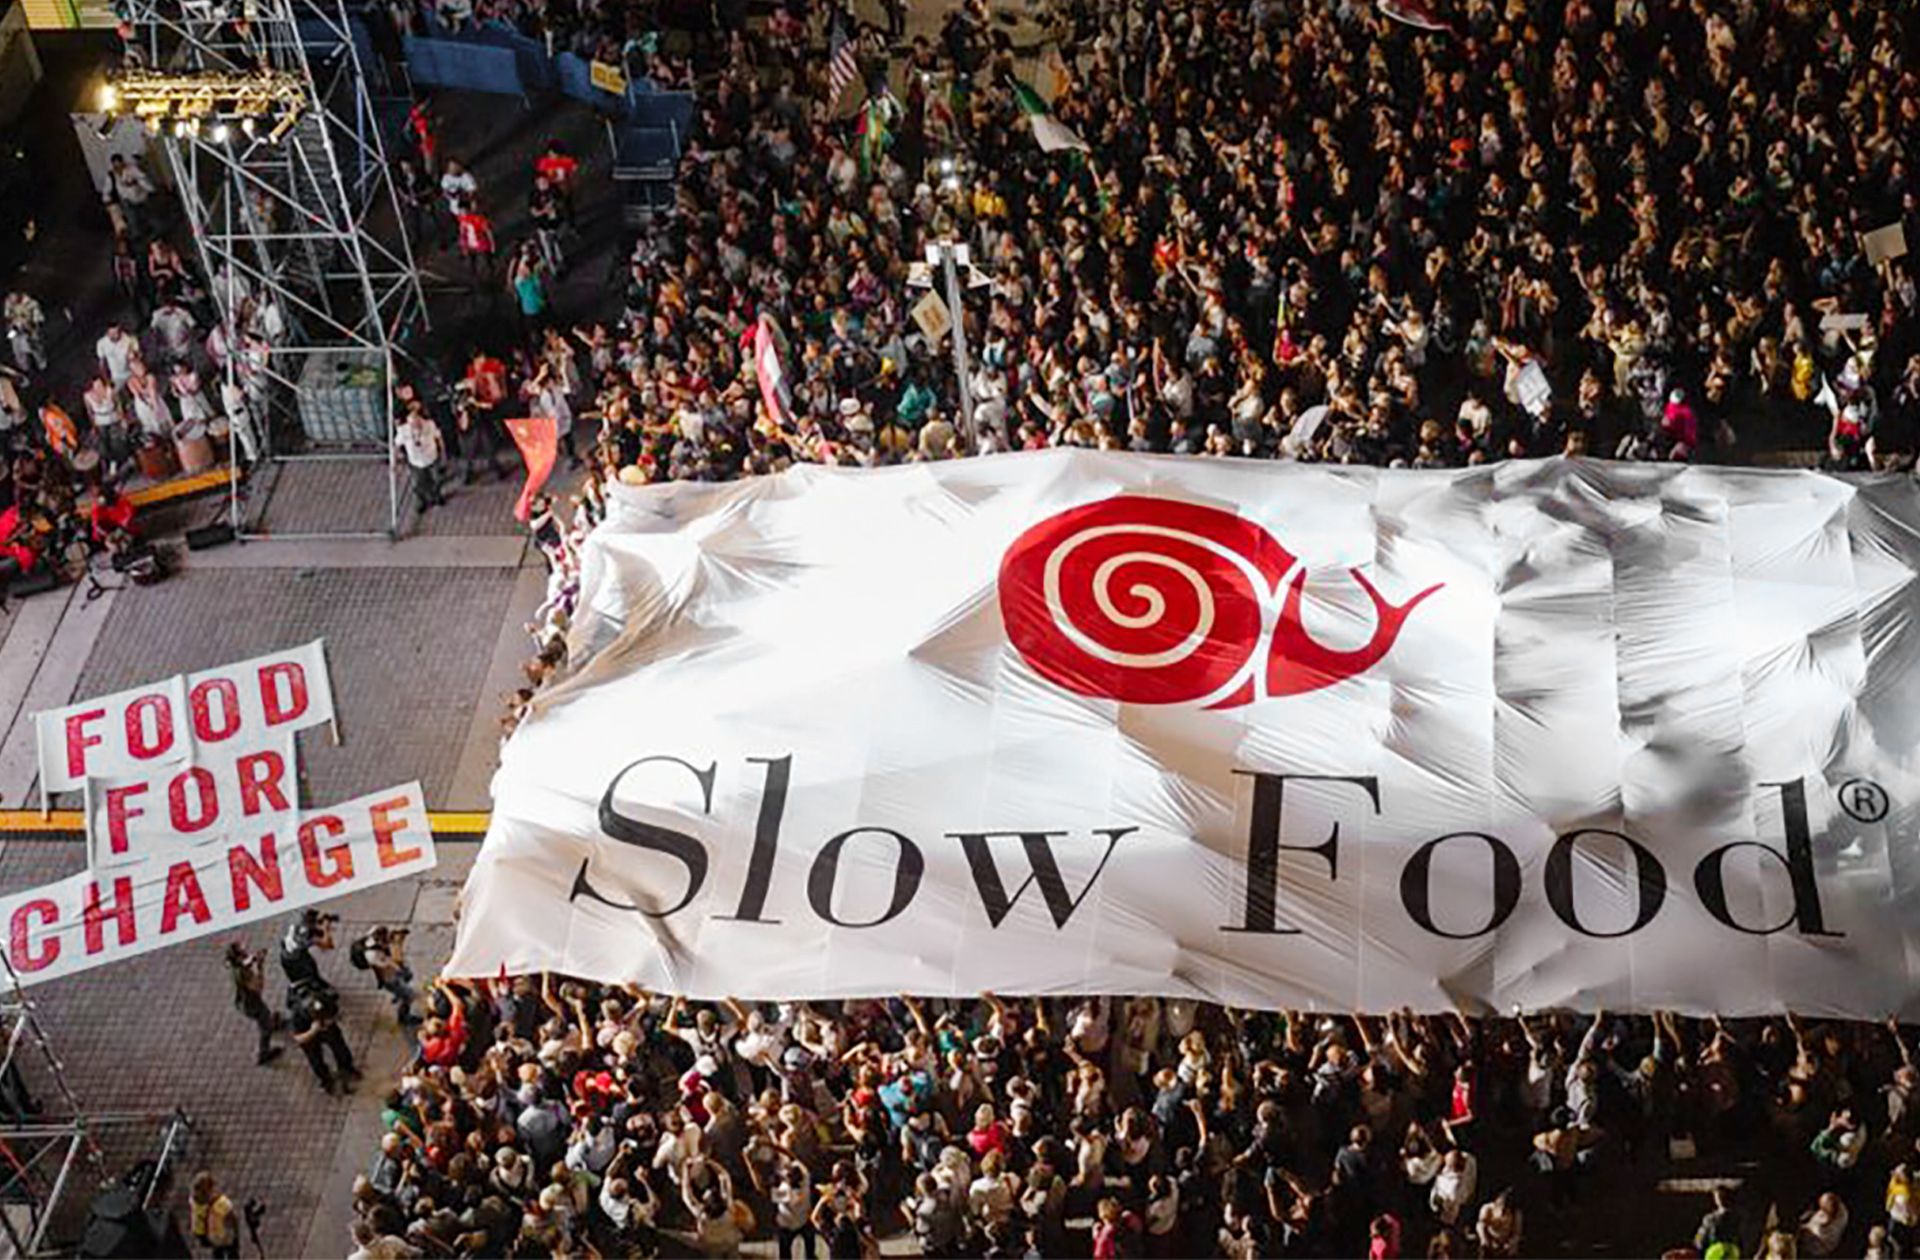 Slow Food is a global movement promoting a socially and environmentally responsible food system that protects biocultural diversity and animal welfare. Since it was set up in 1989, Slow Food has grown into an organisation involving millions of people in over 160 countries.